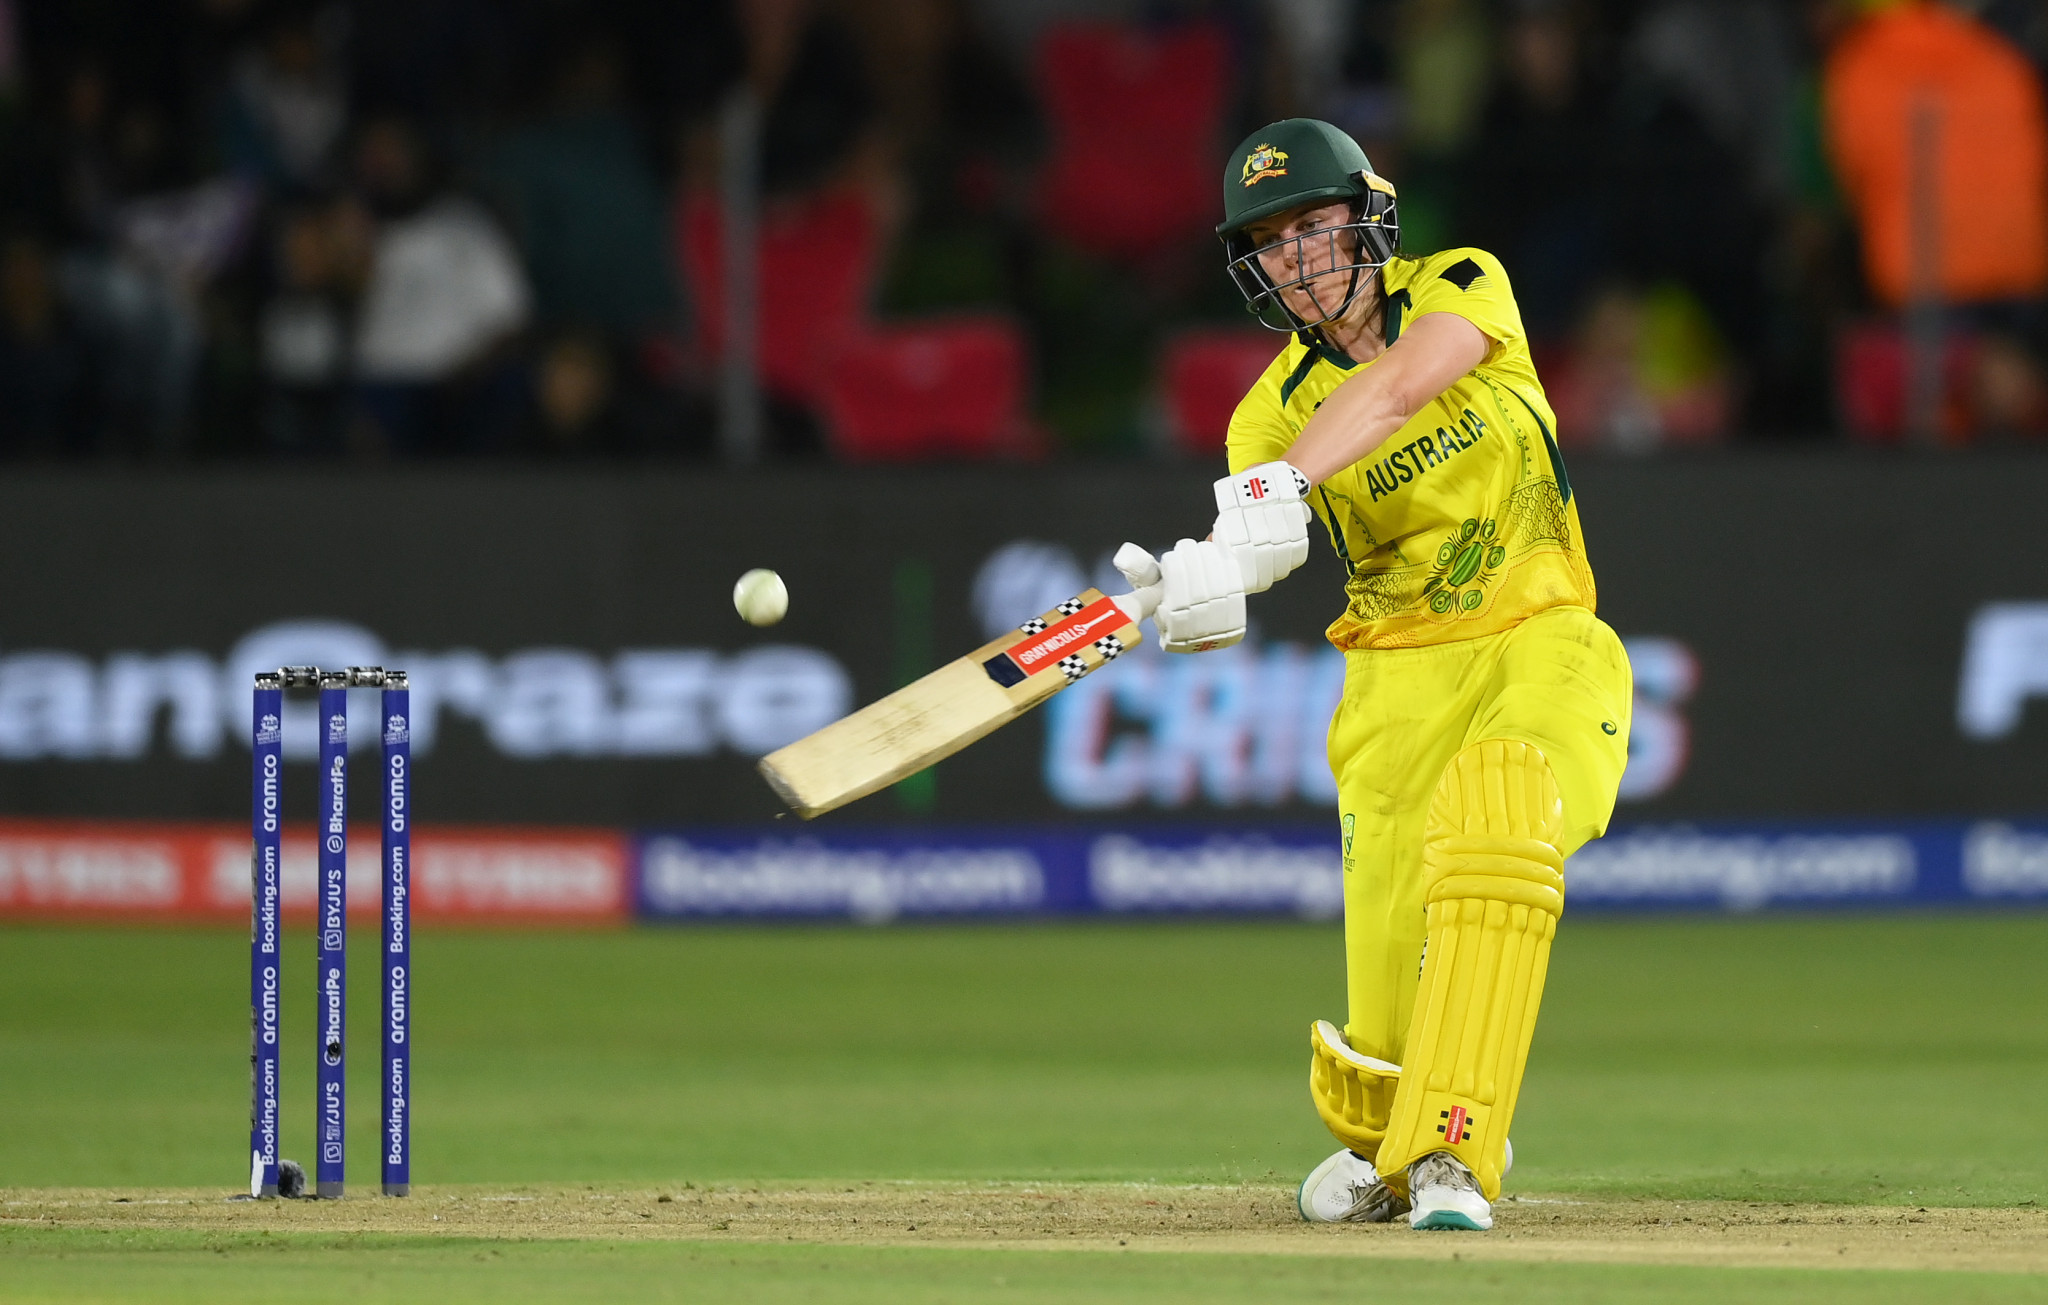 A knock of 57 from Tahlia McGrath helped Australia beat South Africa and complete an unbeaten group stage ©Getty Images  